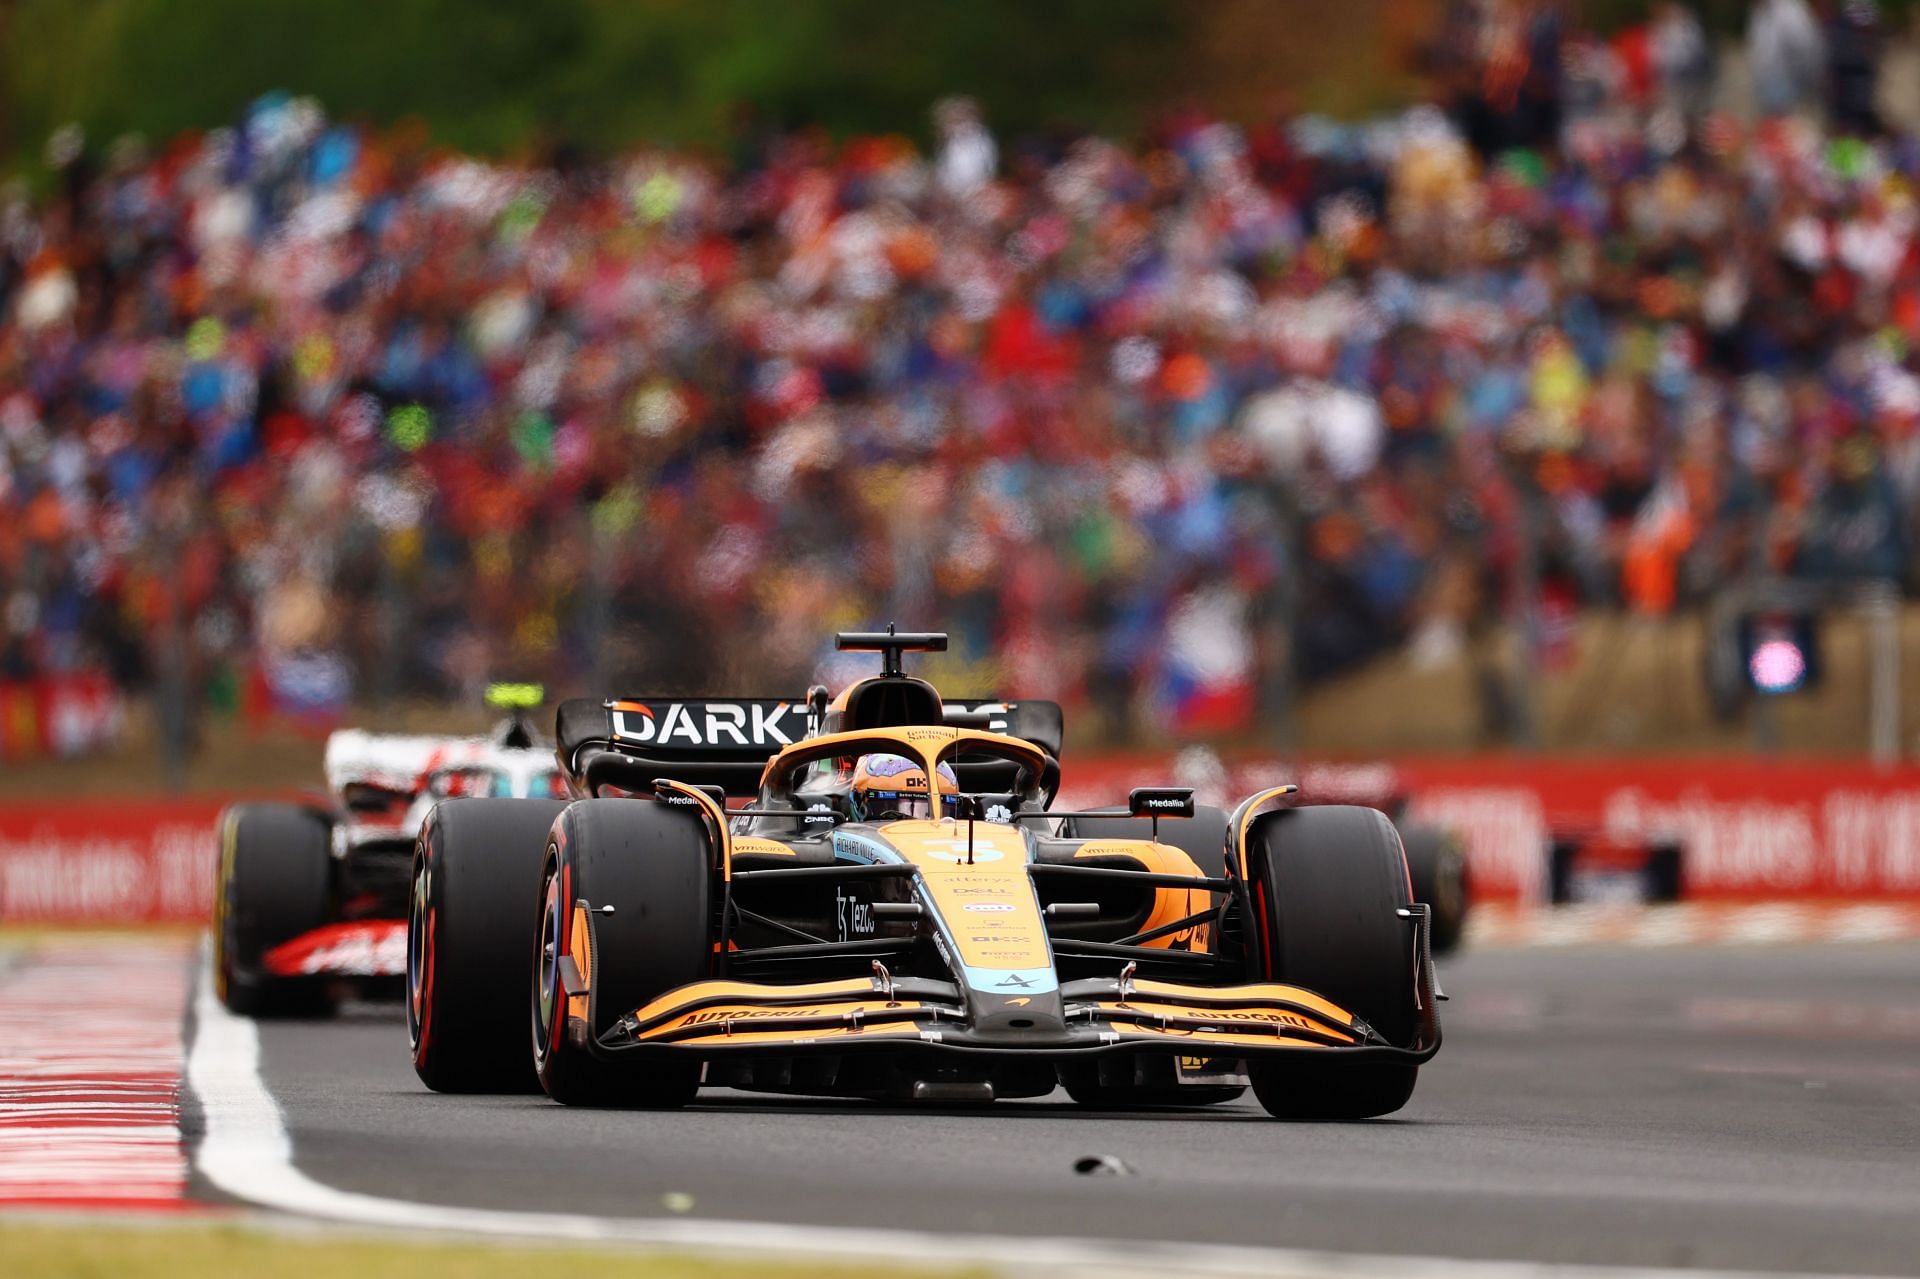 McLaren driver Daniel Ricciardo in action during the 2022 F1 Hungarian GP (Photo by Francois Nel/Getty Images)